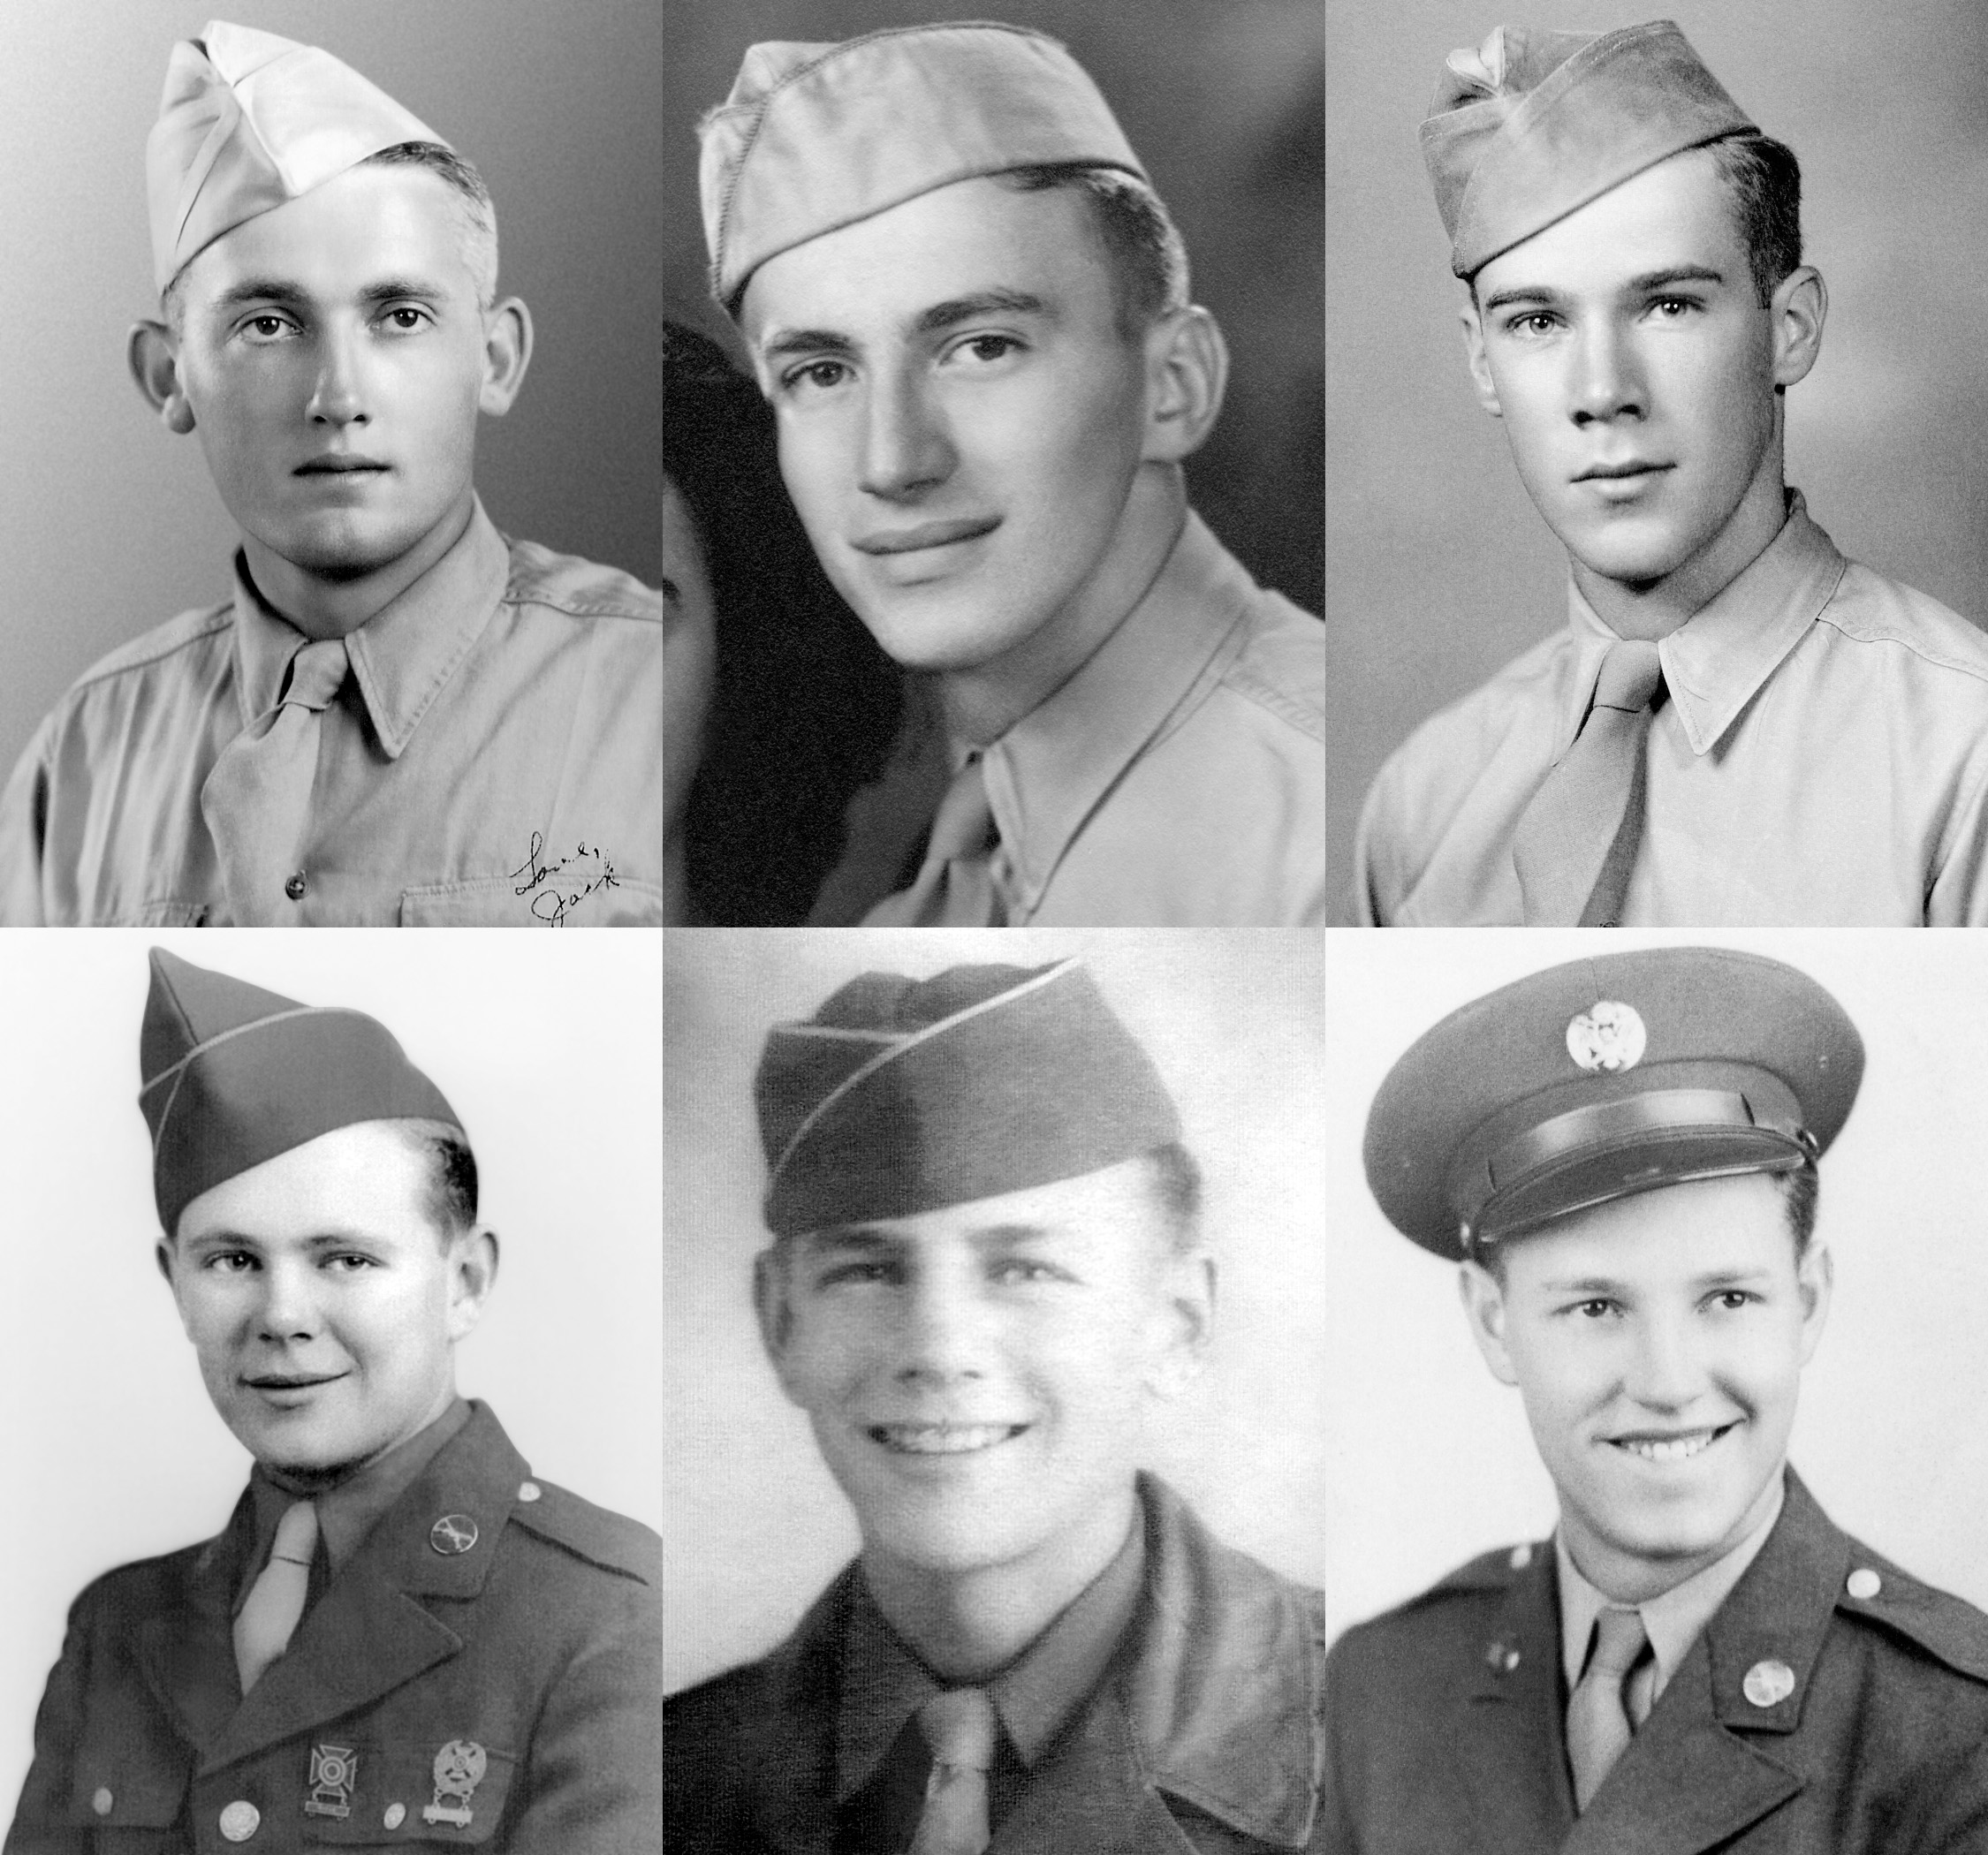 TOP ROW (left to right): Pfc. Jack C. Beckwith, Company C, 395th Infantry; Pfc. Saul Kokotovich, Company C, 395th Infantry; Pfc. David A. Read, Cannon Company, 395th Infantry. 
BOTTOM ROW (left to right): Pfc. Ewing E. Fidler, Company E, 394th Infatry; Pfc. Stanley E. Larson, Company H, 394th Infantry; Sgt. Frederick F. Zimmerman, Company H, 394th Infantry.